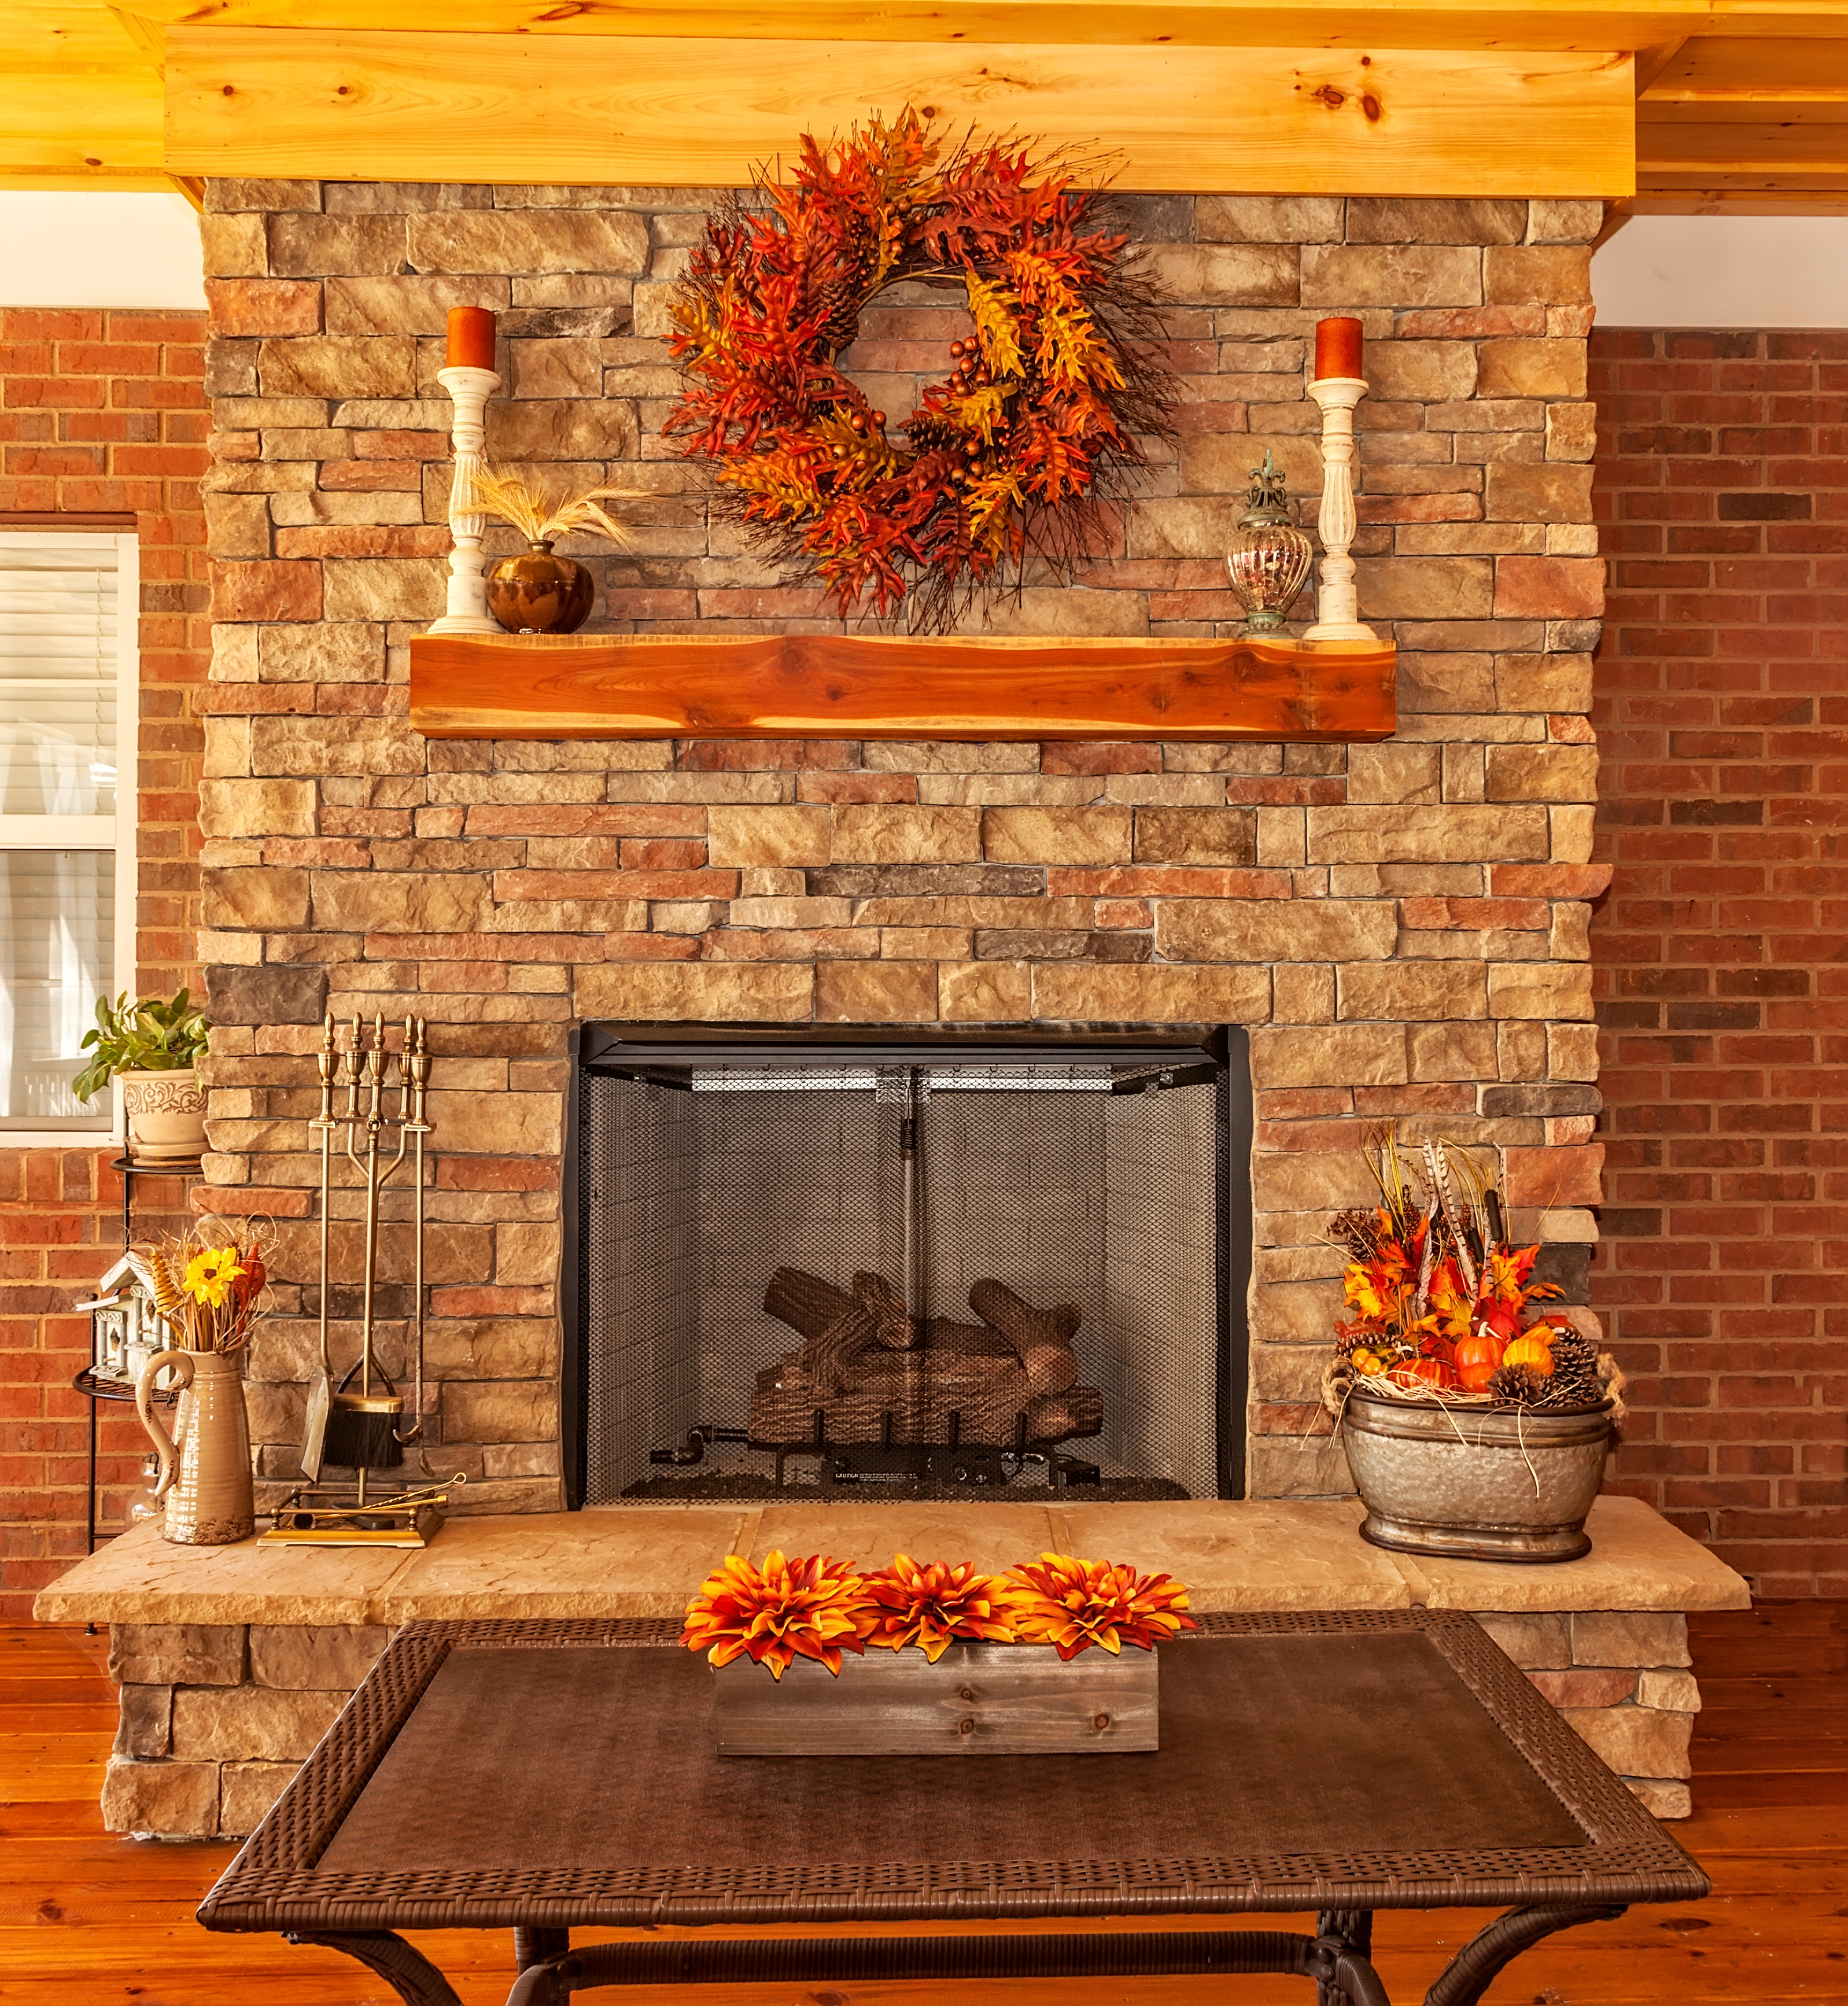 5 Fall Mantel Decorating Ideas That'll Make You Look Like a Pro 95